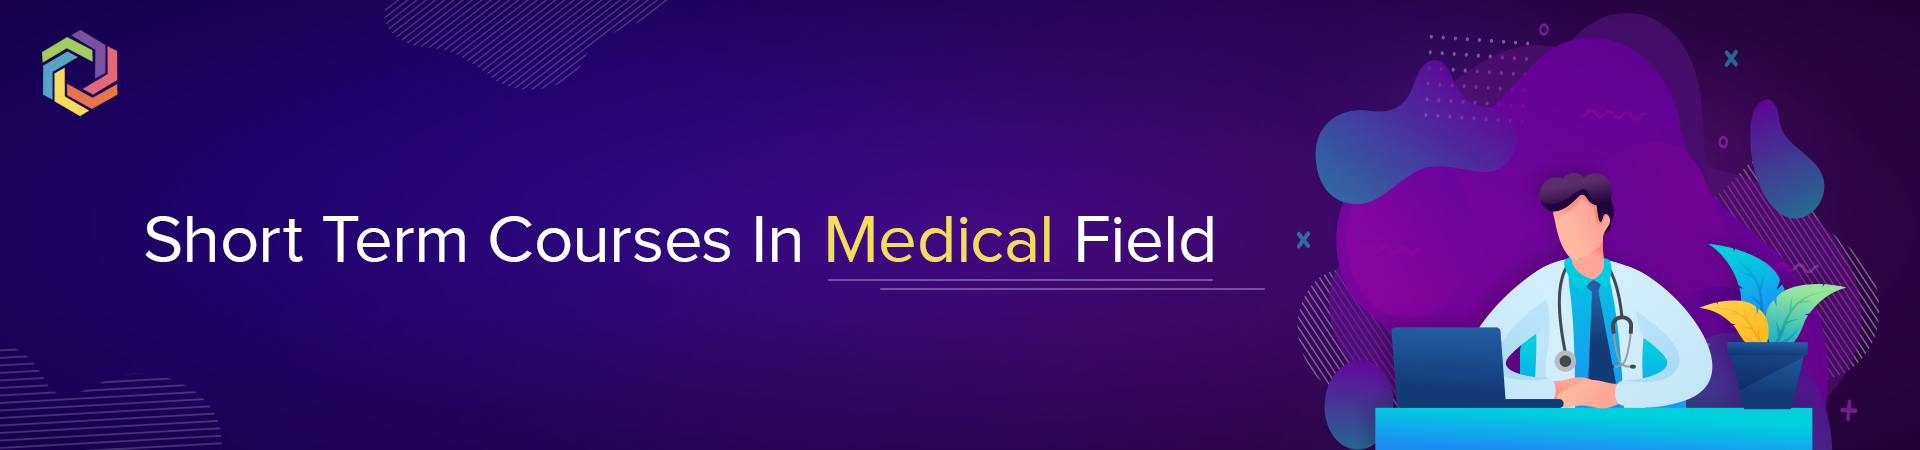 Short Term Courses in Medical Field